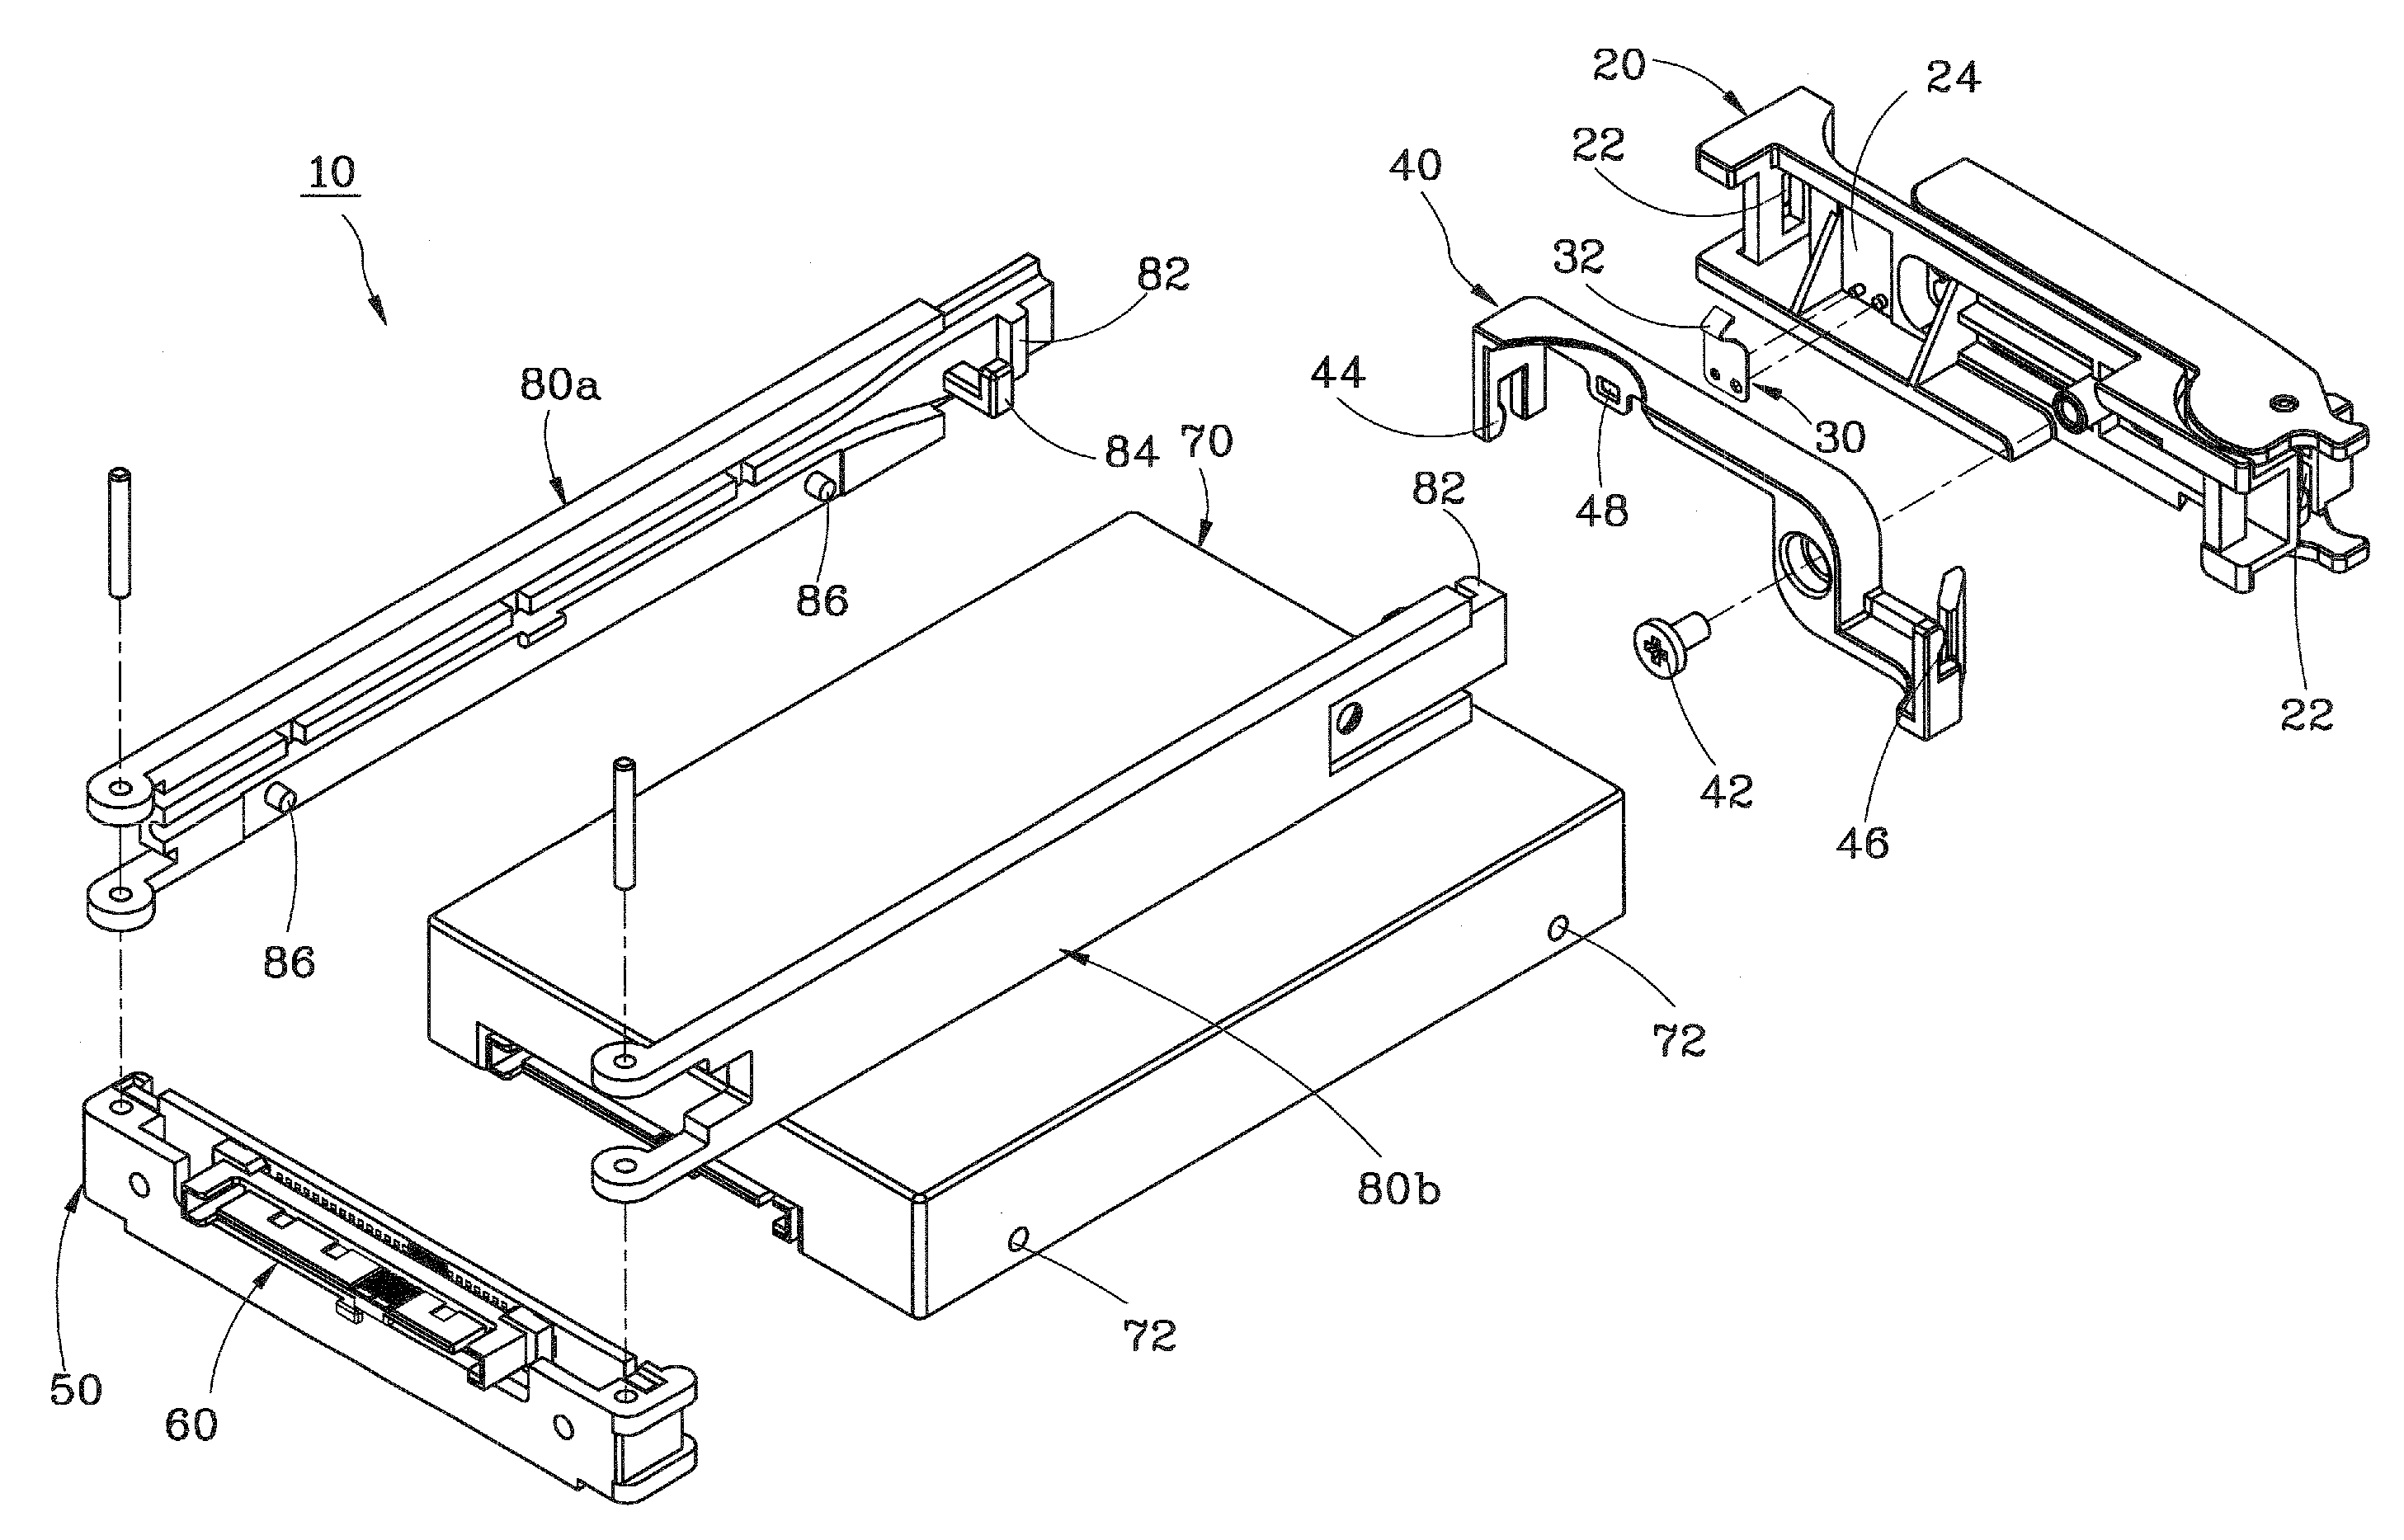 Removable disk drive mounting device including a first holder pivotally connected to second holders which in turn are detachably connected to a handle